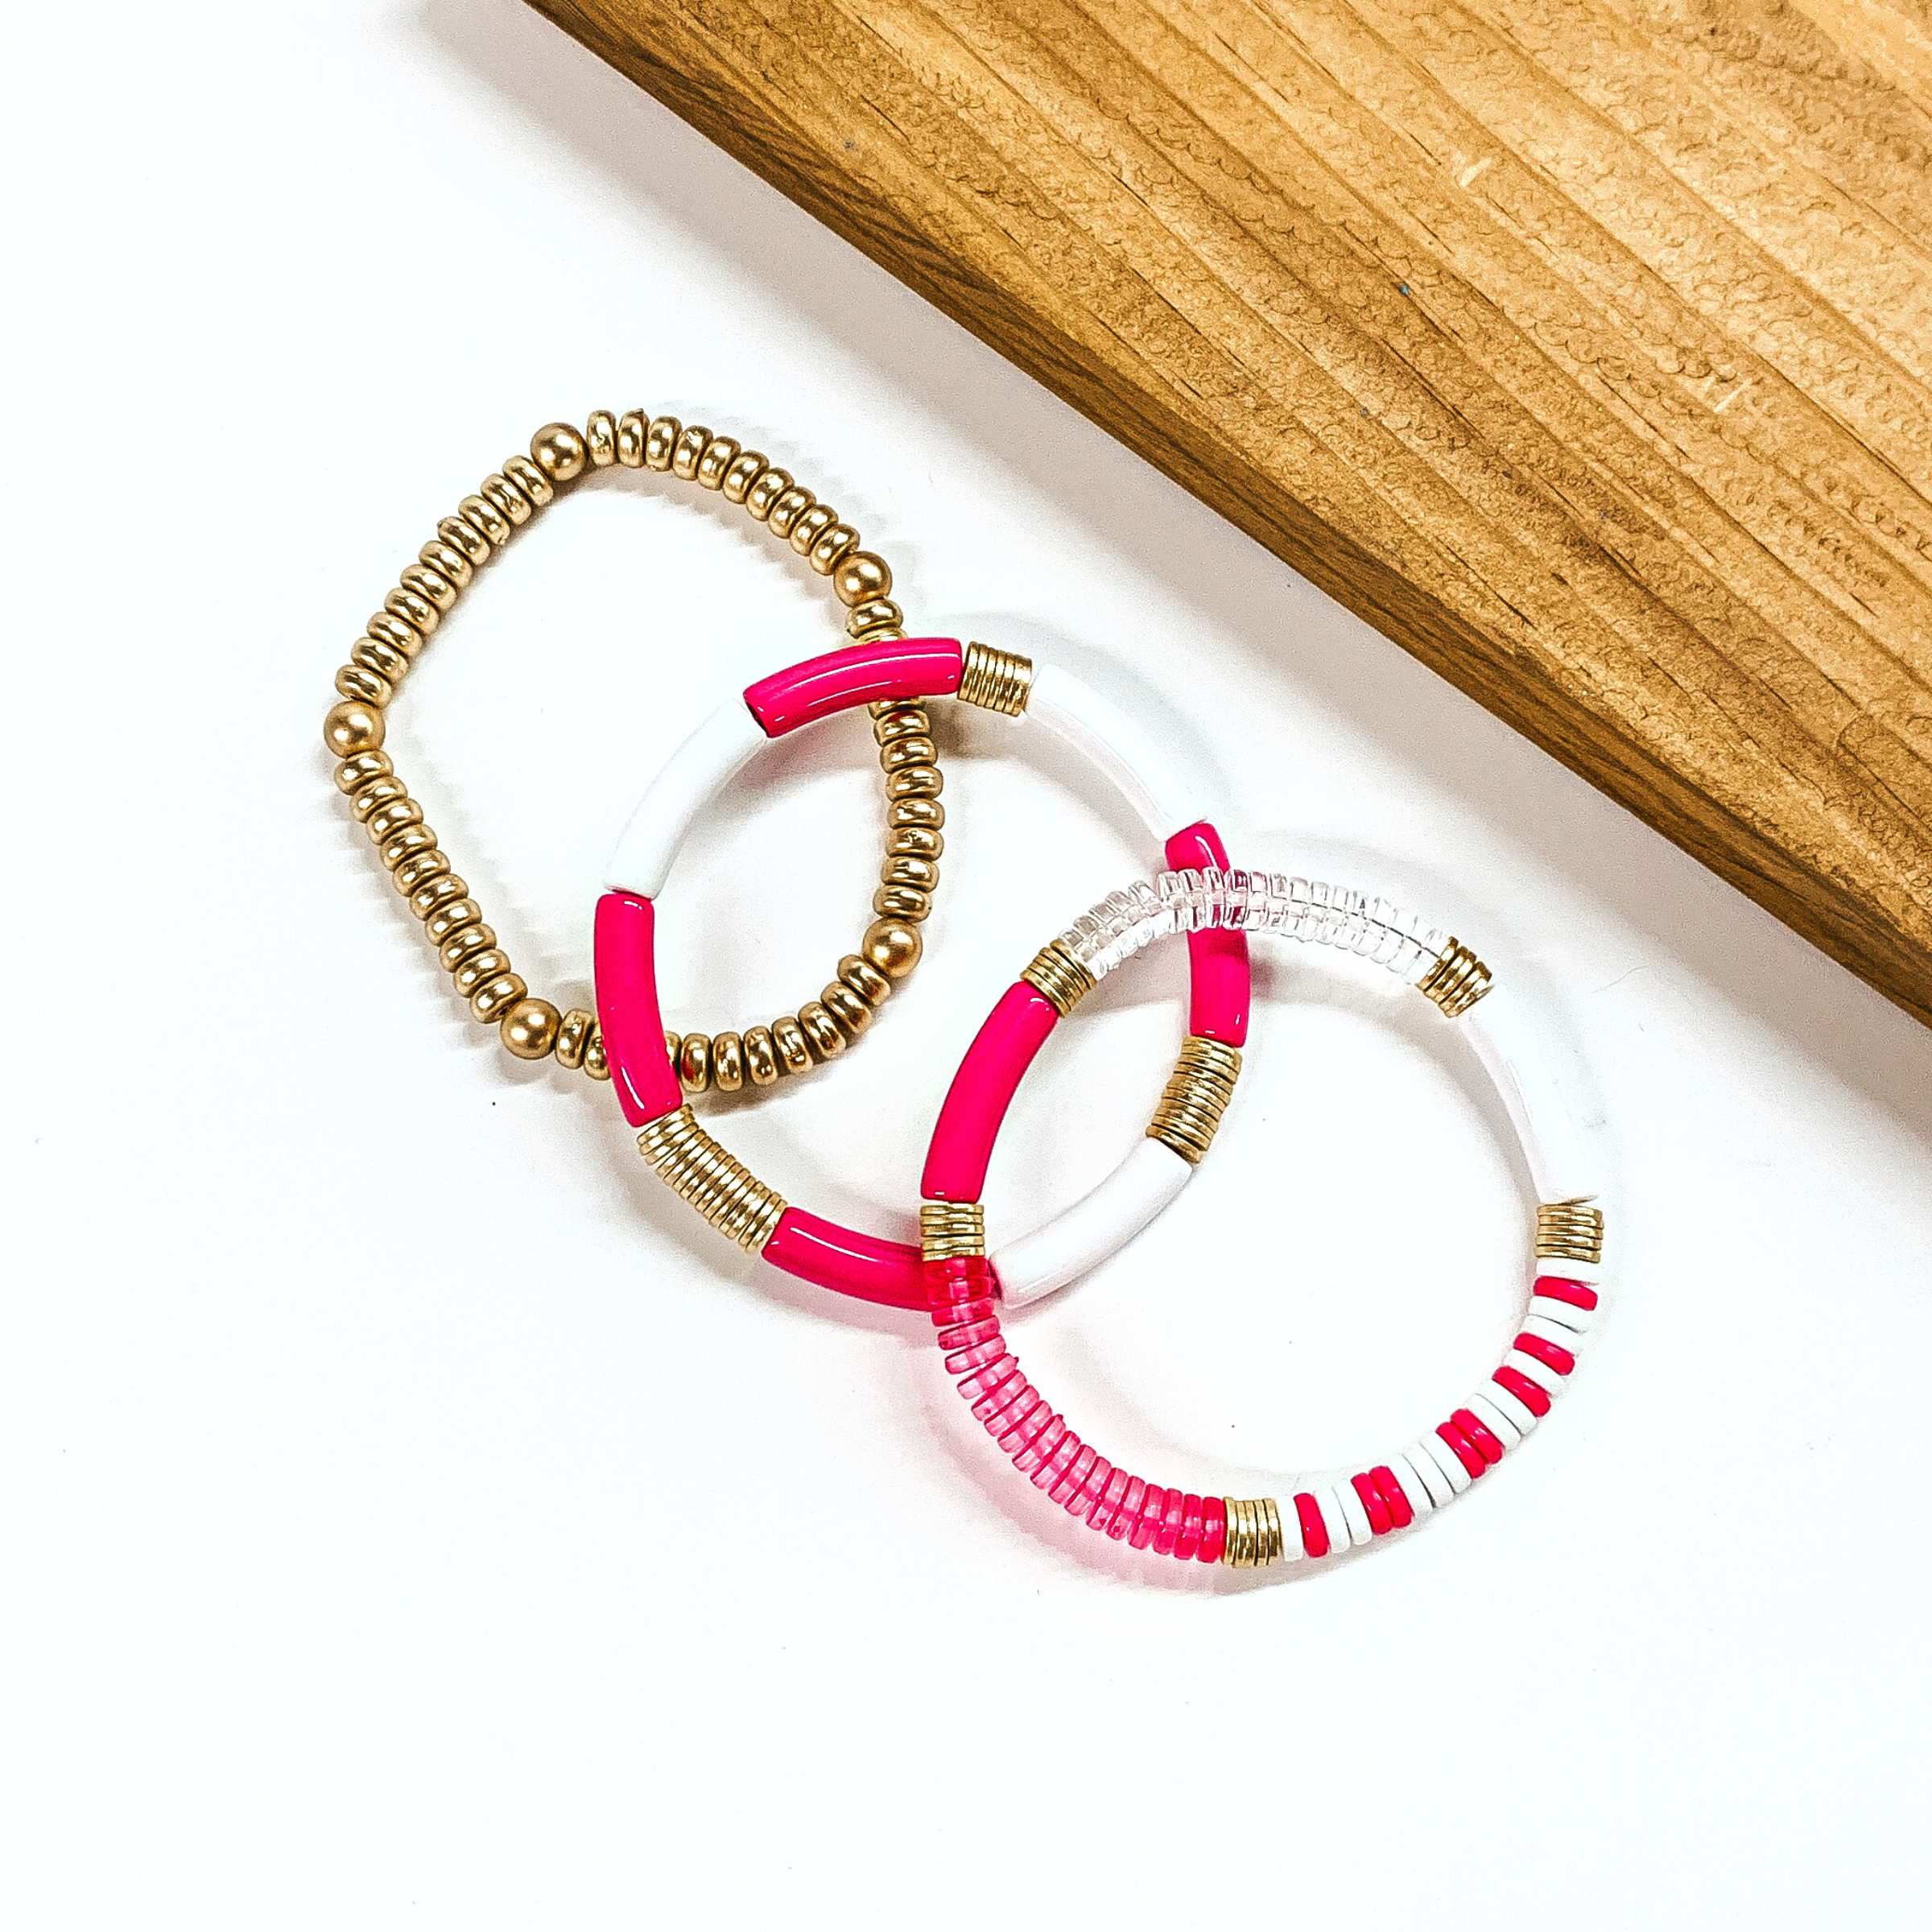 This is a set of three bracelets in hot pink, gold, and white. From left to right; gold beaded bracelet, hot pink and white tube bracelet with gold spacers. Last bracelet has hot pink and white beads in different shapes/forms with gold spacers and transparent pink and clear beads. This bracelet set is taken on a white background with a slab of wood in the back as decor.